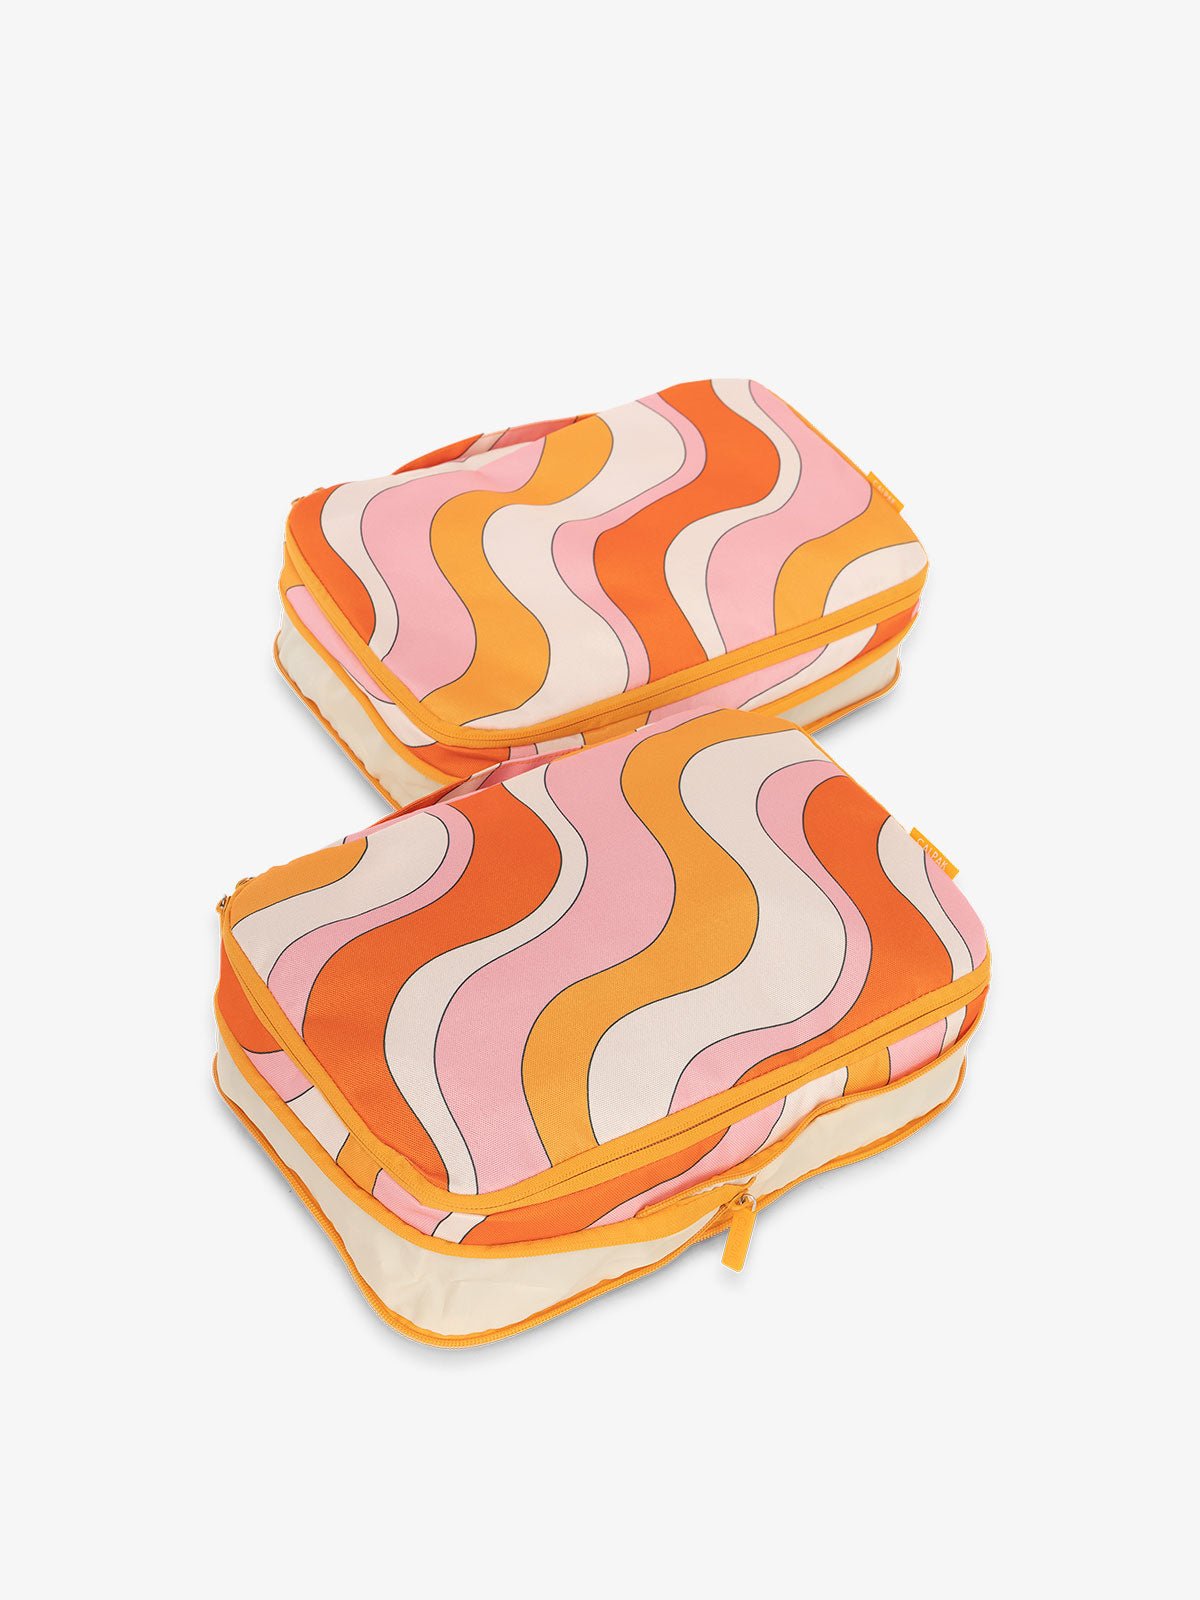 CALPAK compression packing cubes with handles in wavy orange print